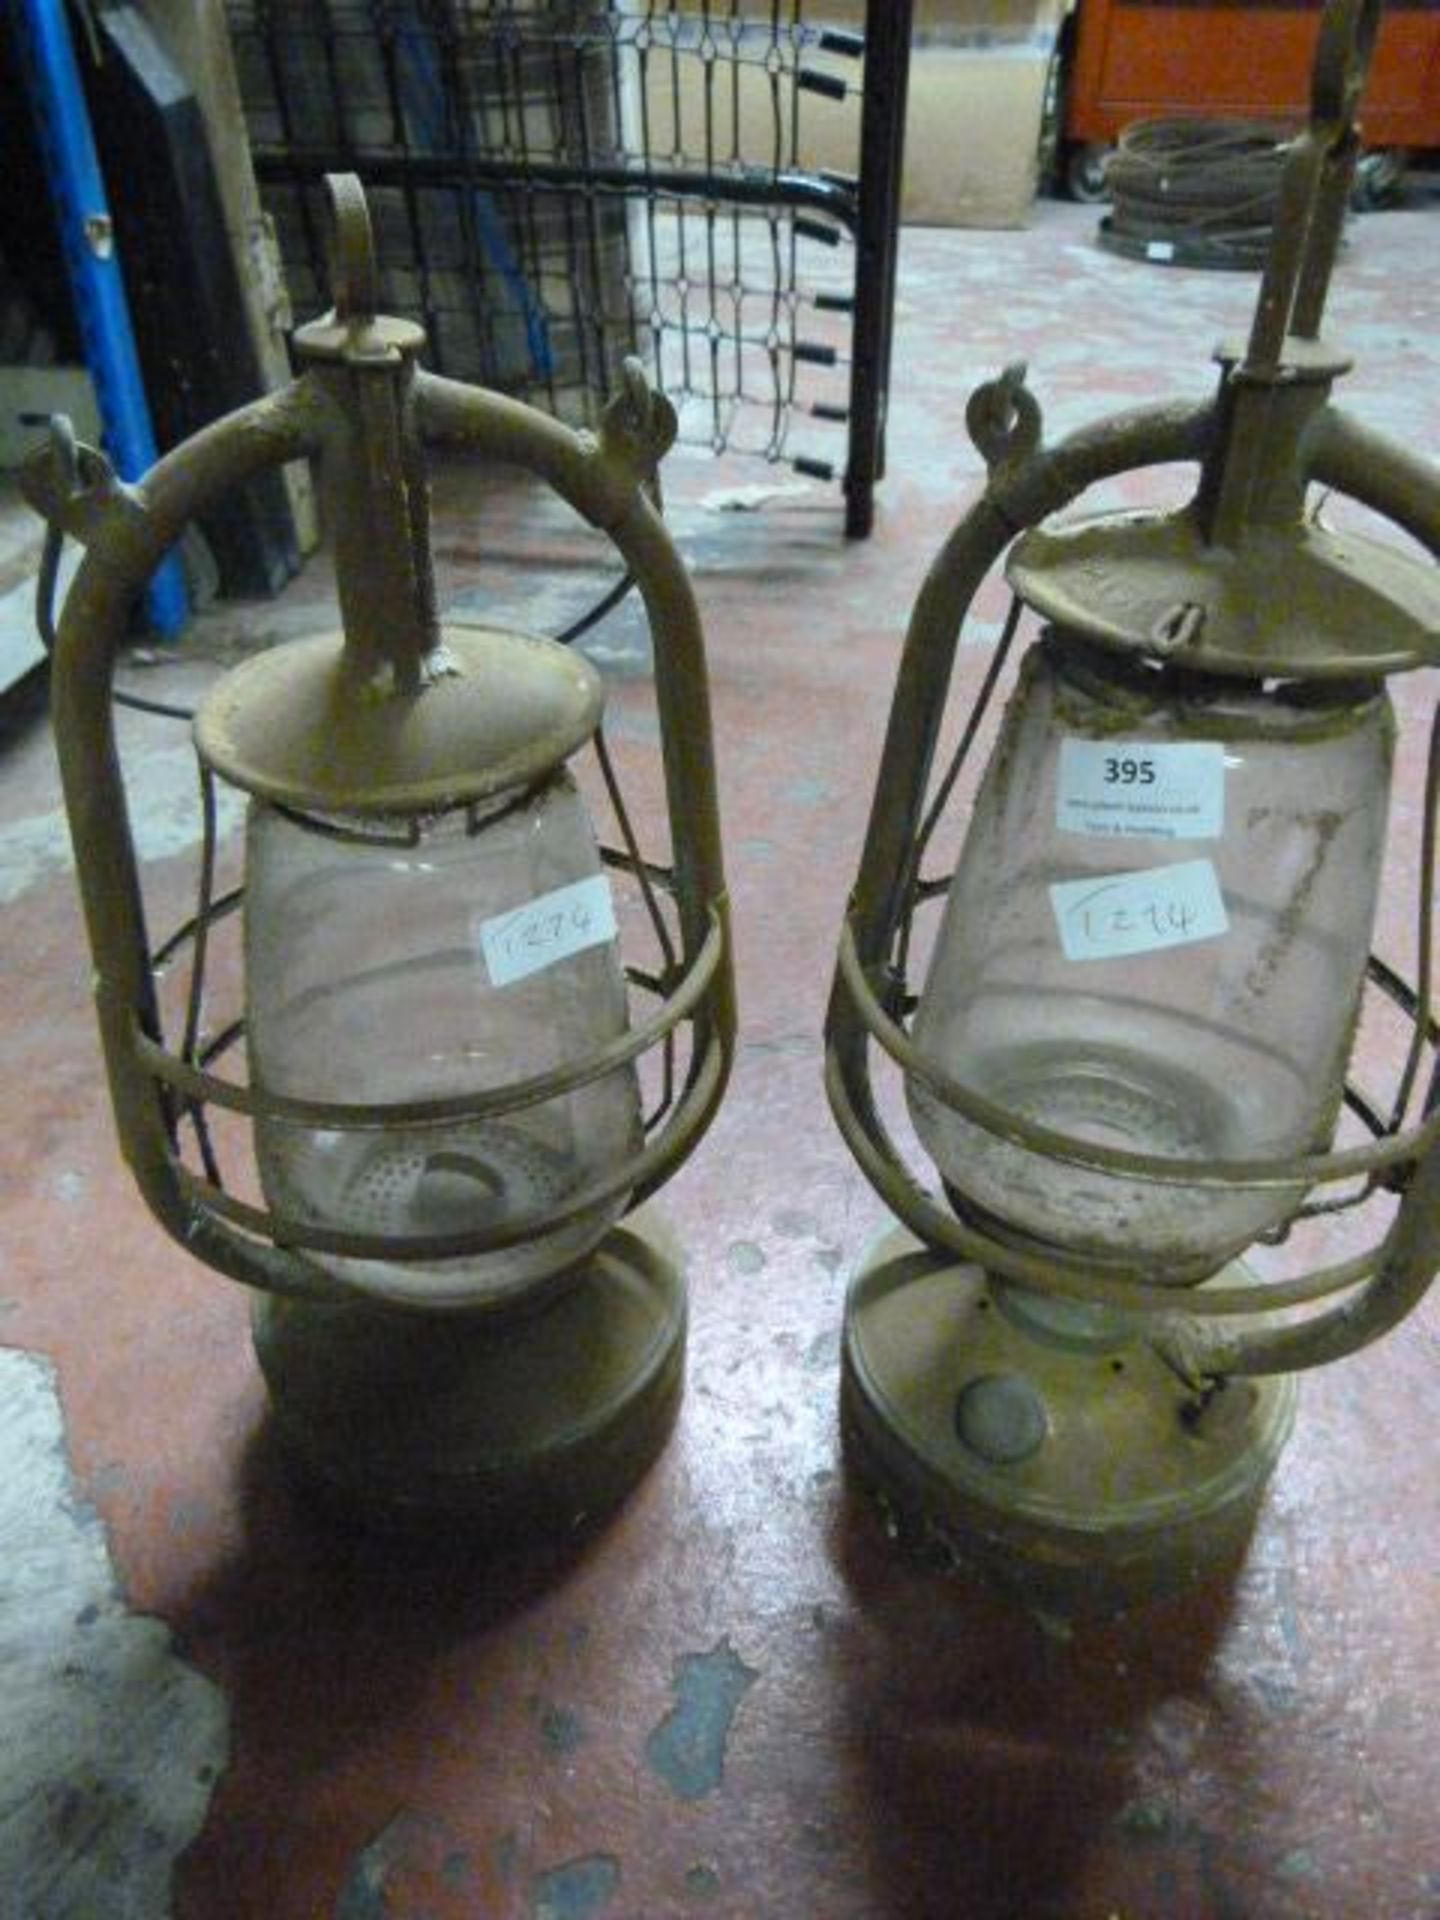 Two Vintage Tilley Lamps